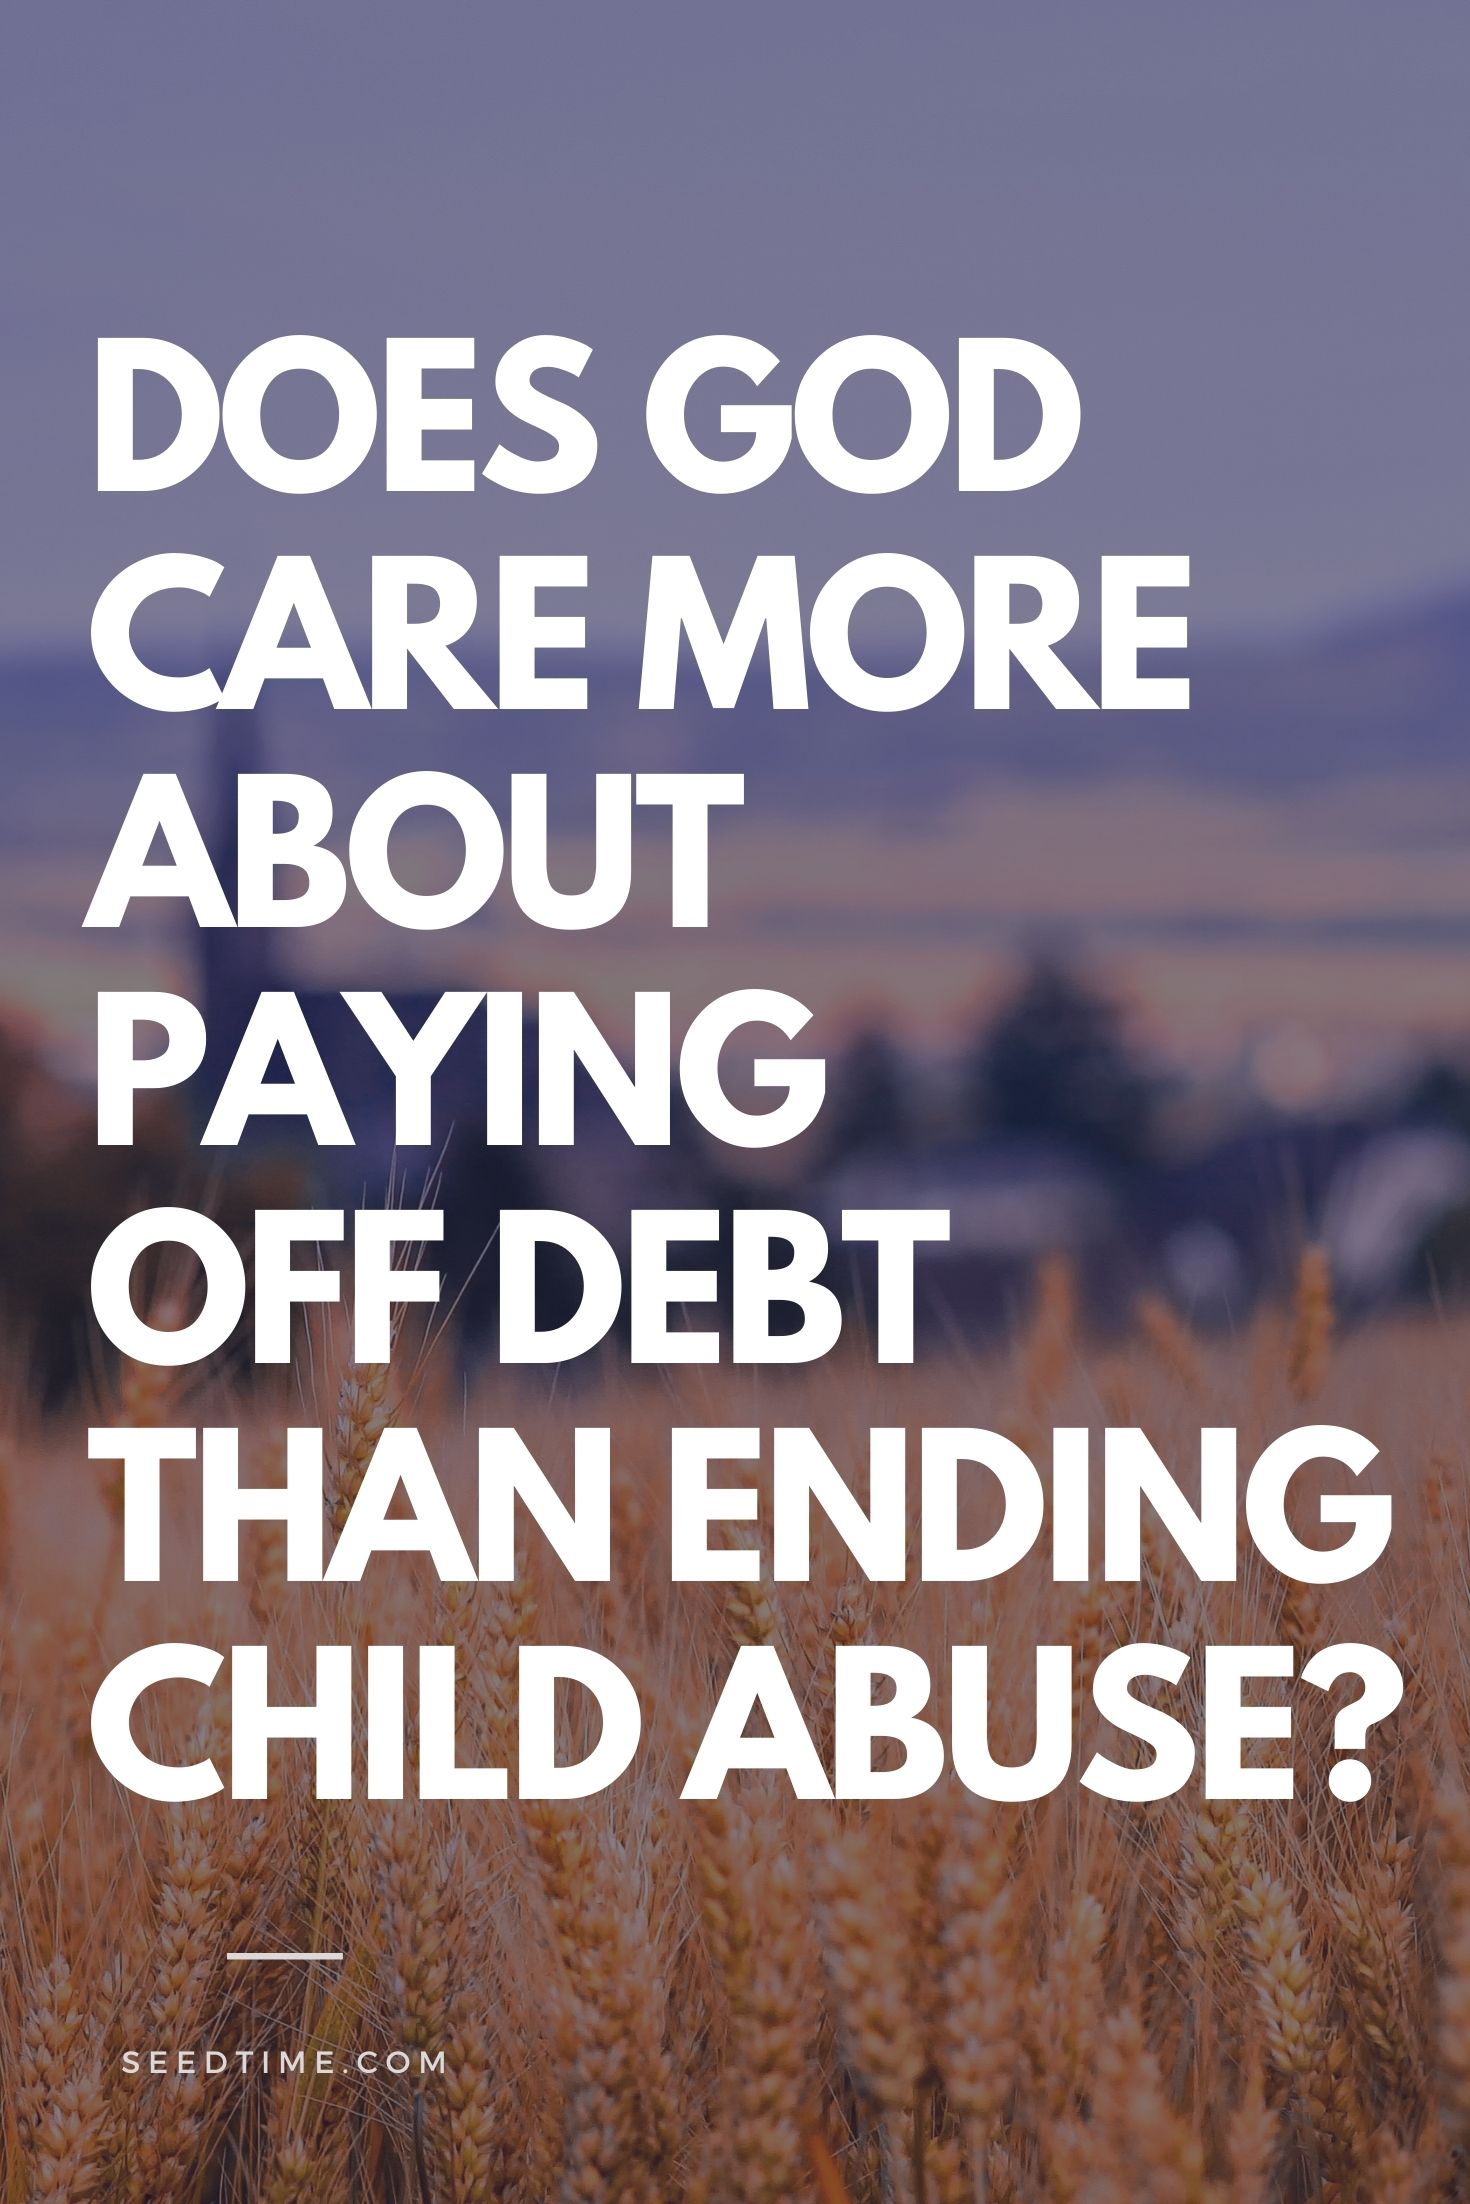 Does God care more about paying off debt than ending child abuse